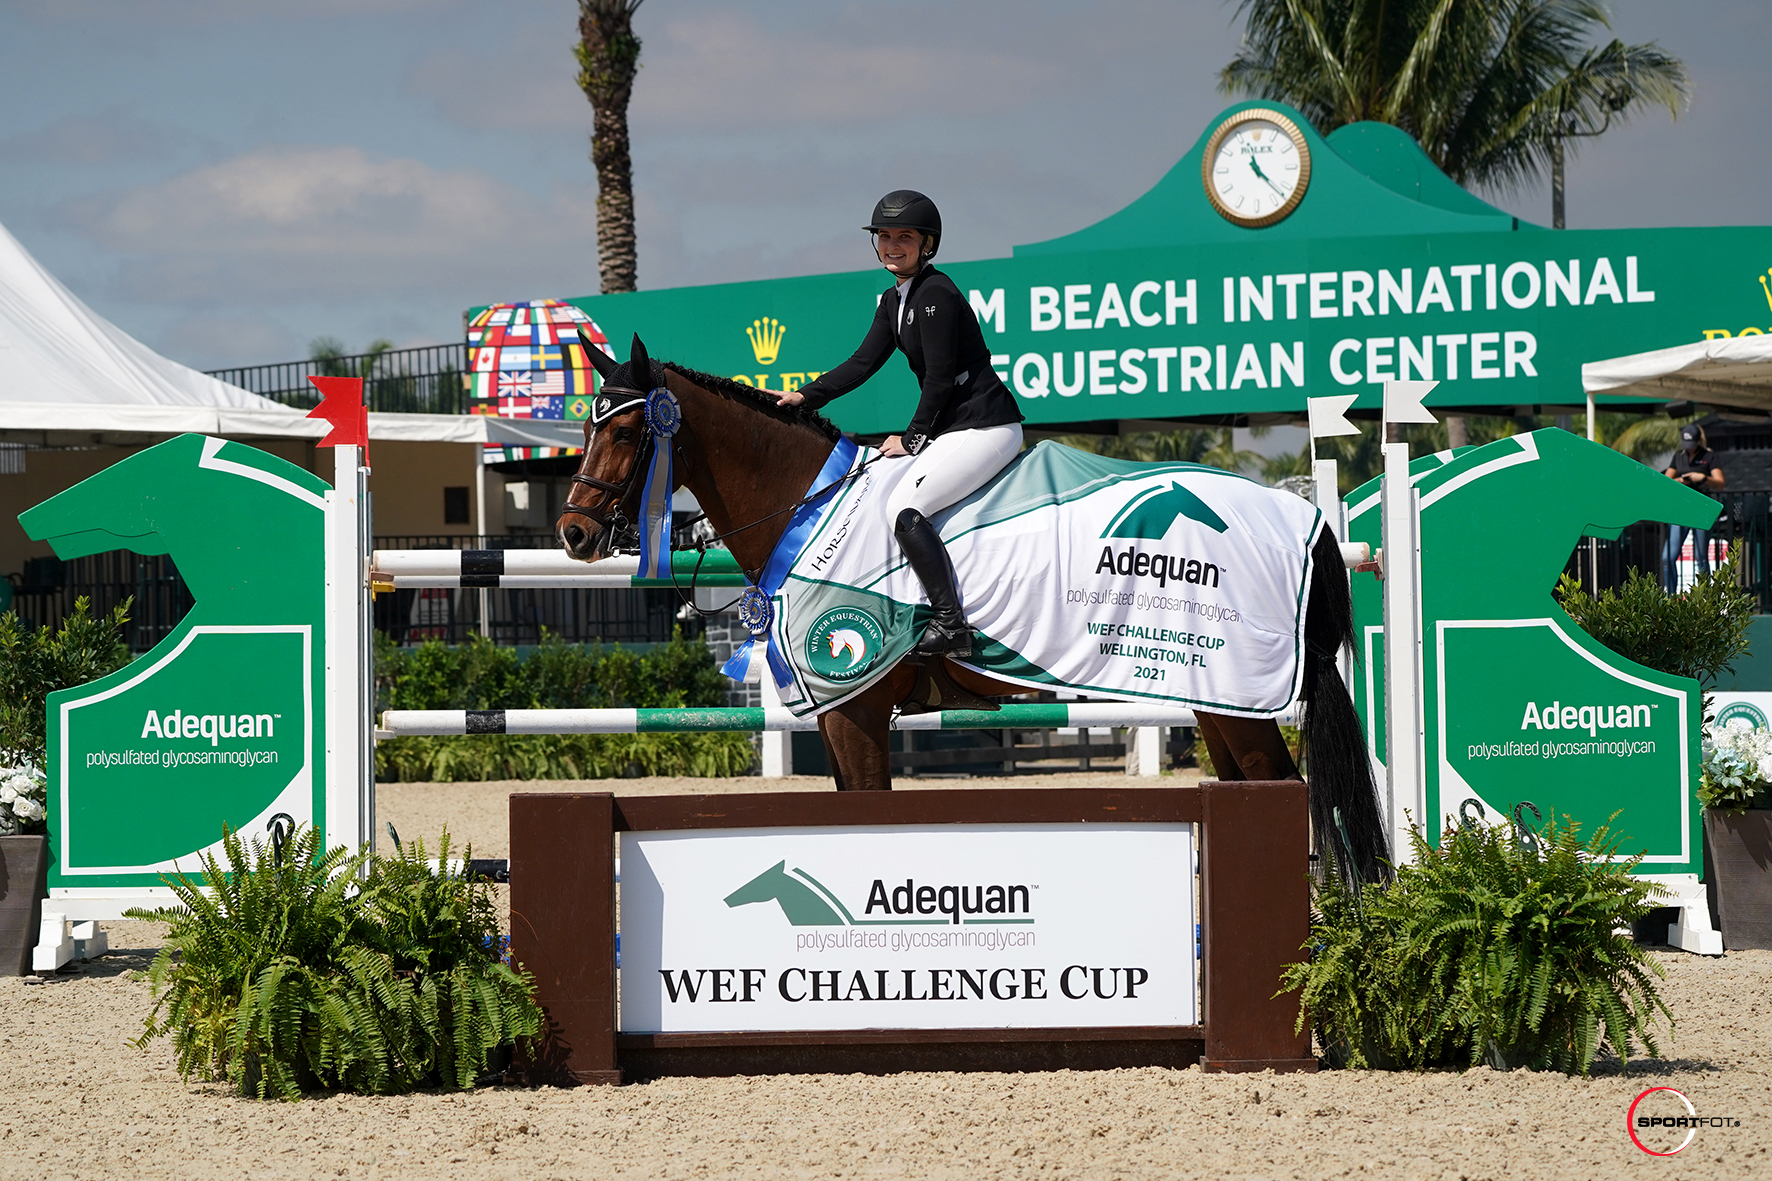 Emily Moffitt and Tipsy Du Terral Top the $37,000 Adequan WEF Challenge Cup Round 8 CSIO4*